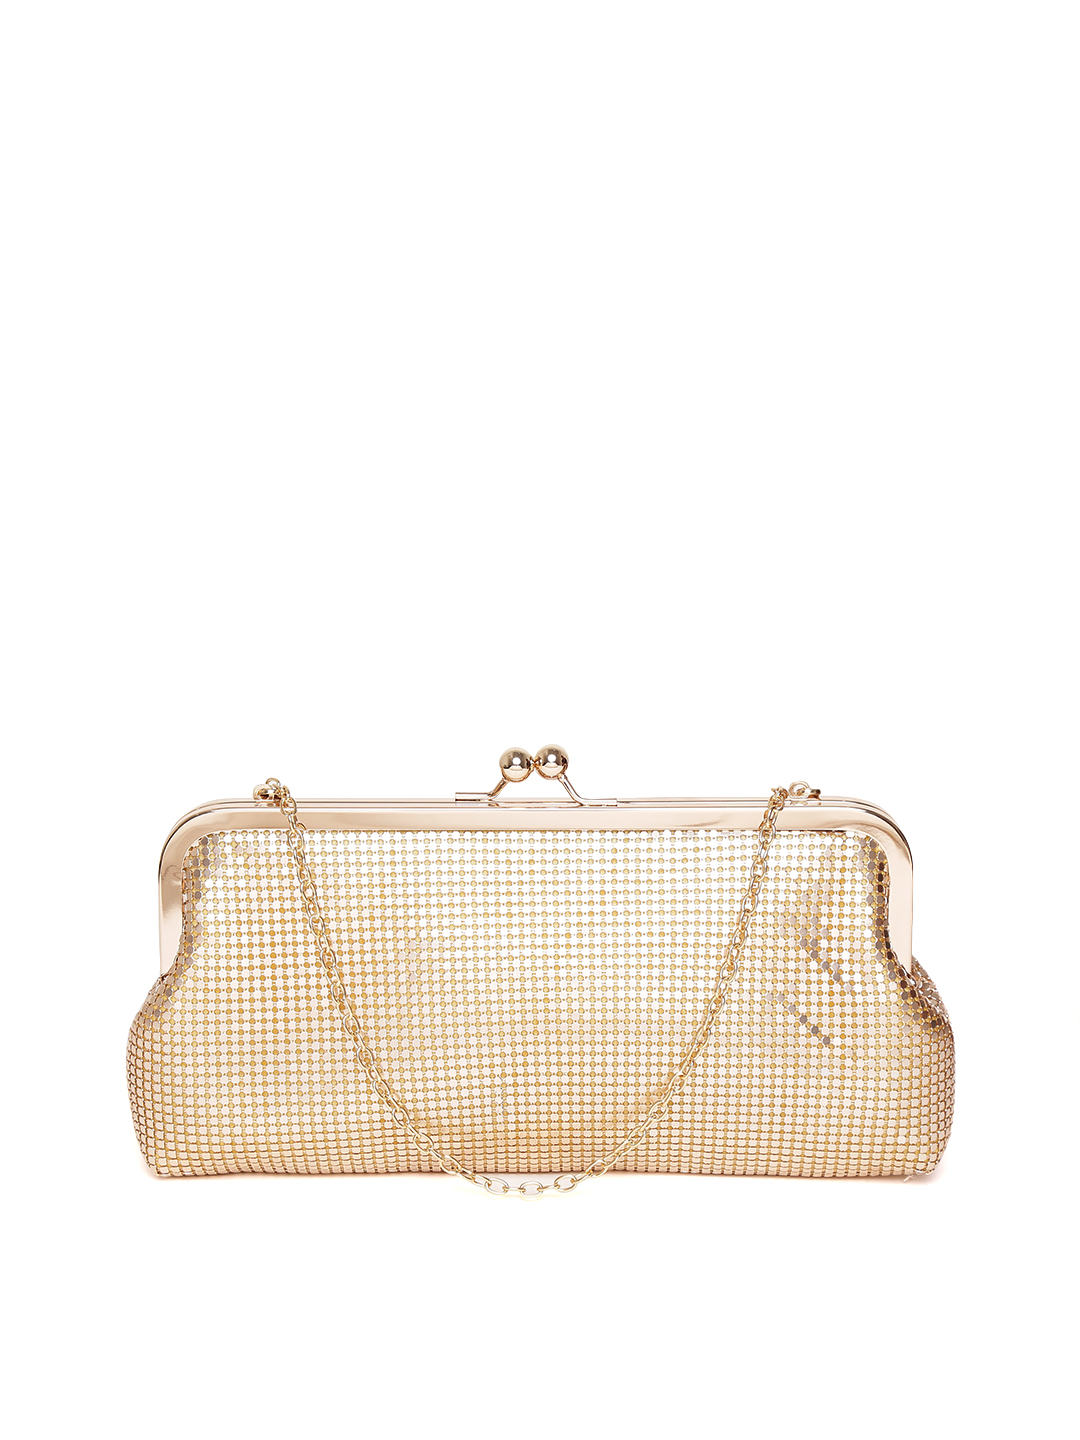 Lisa Haydon for Gold-Toned Patterned Clutch with Chain Strap